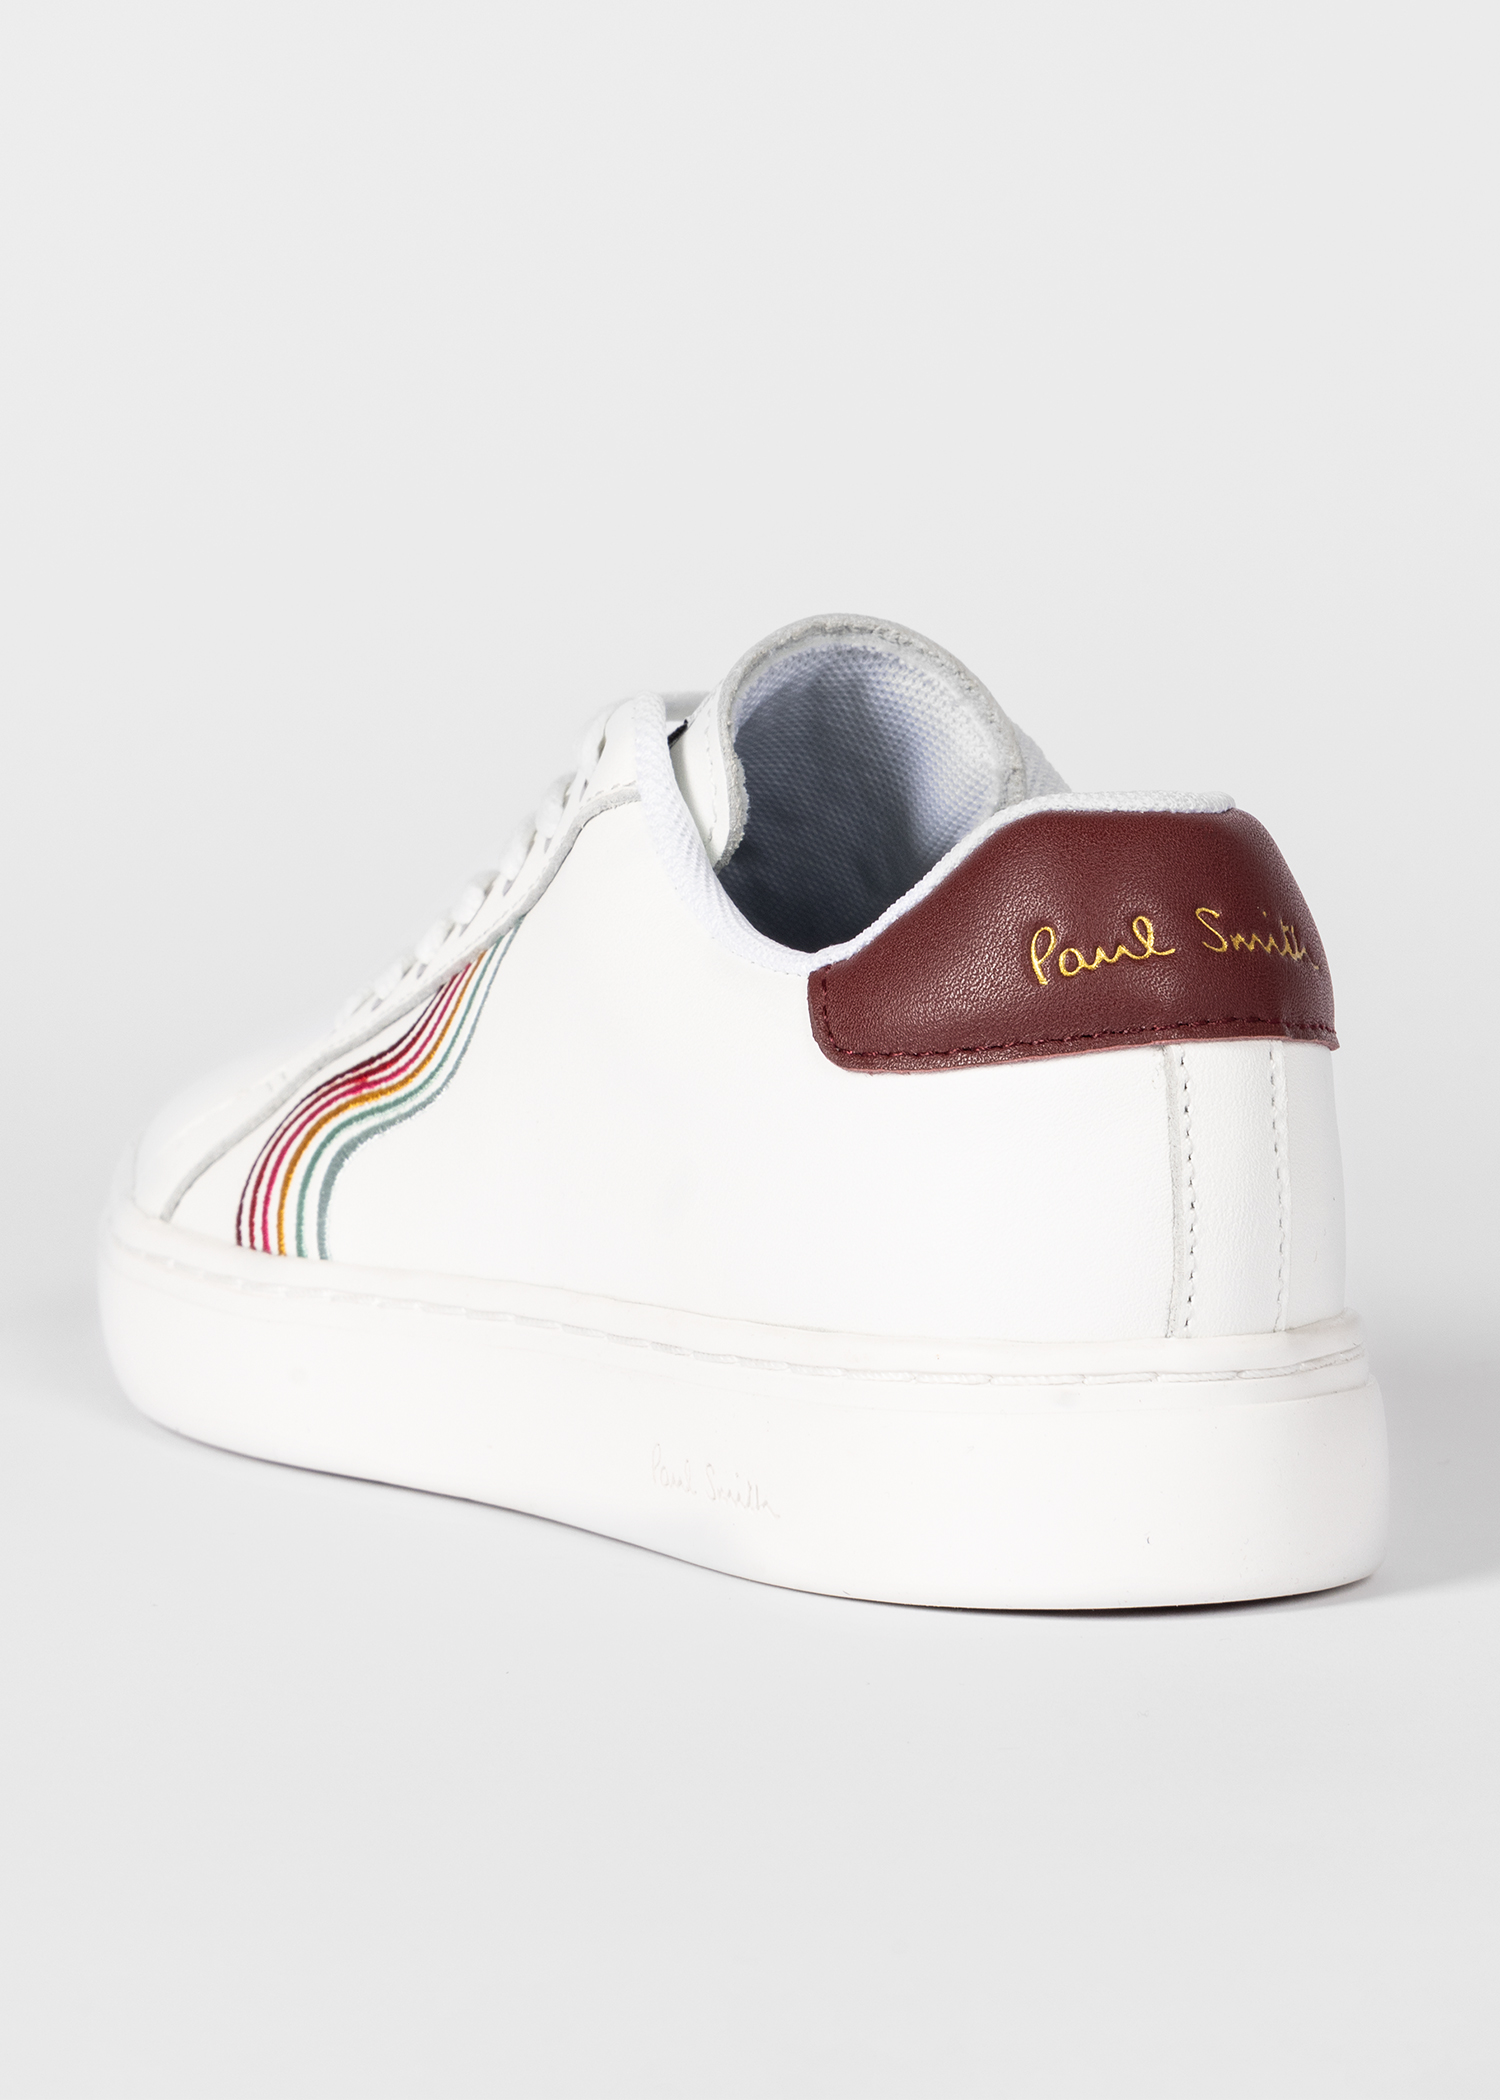 Designer Trainers for Women | Paul Smith